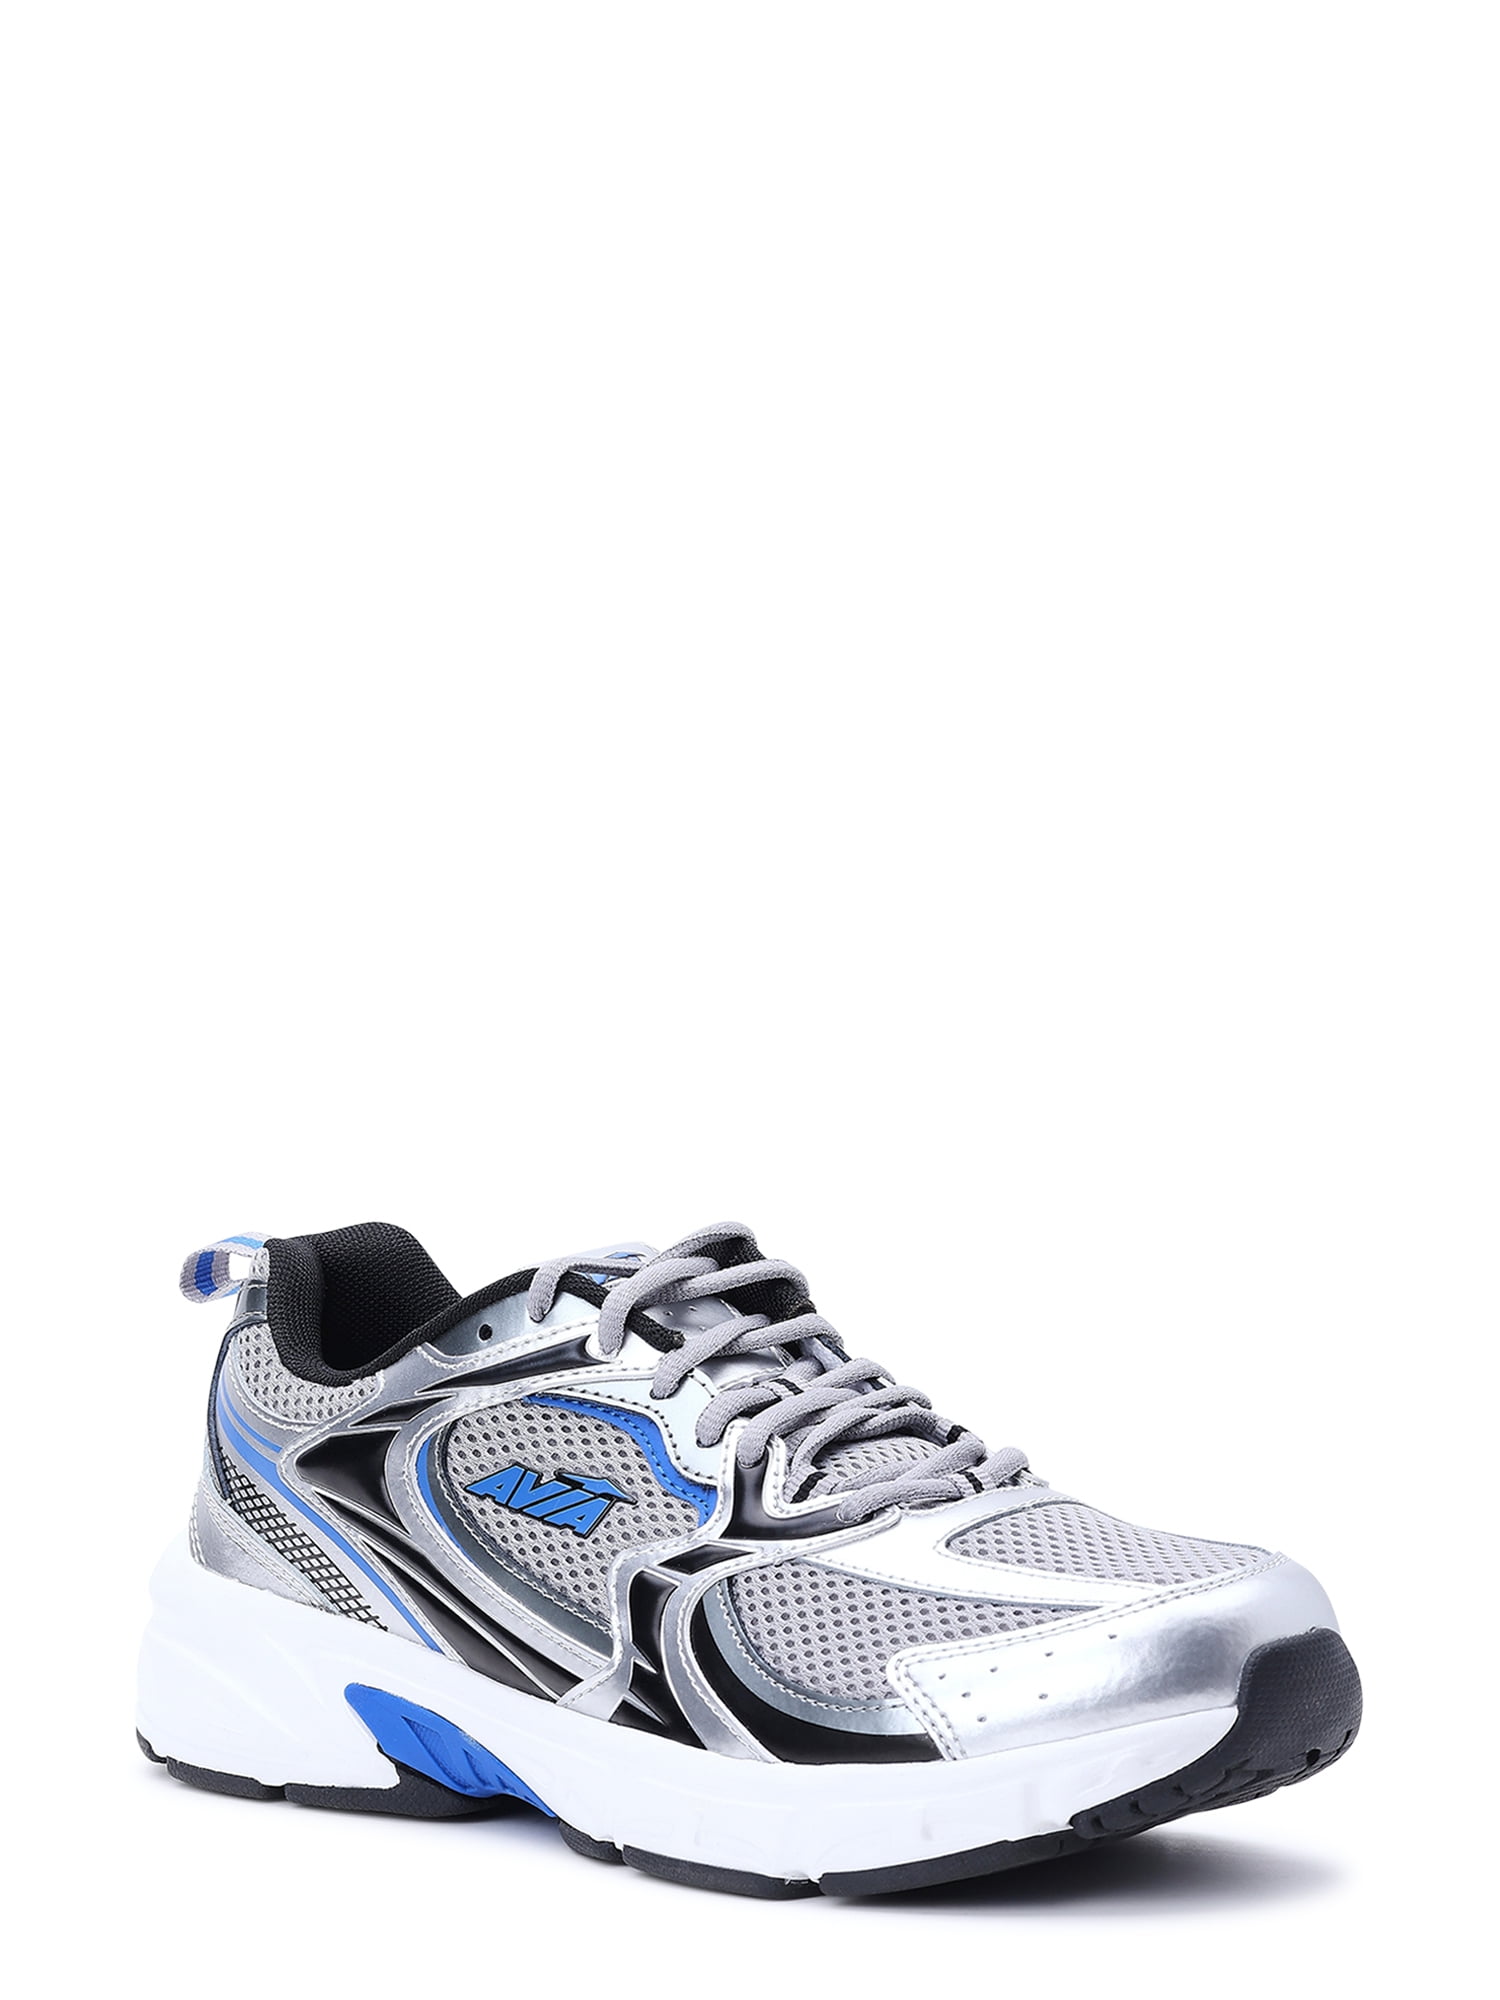 Avia Men's 5000 Athletic Performance Running Shoes (Wide Width Available) 